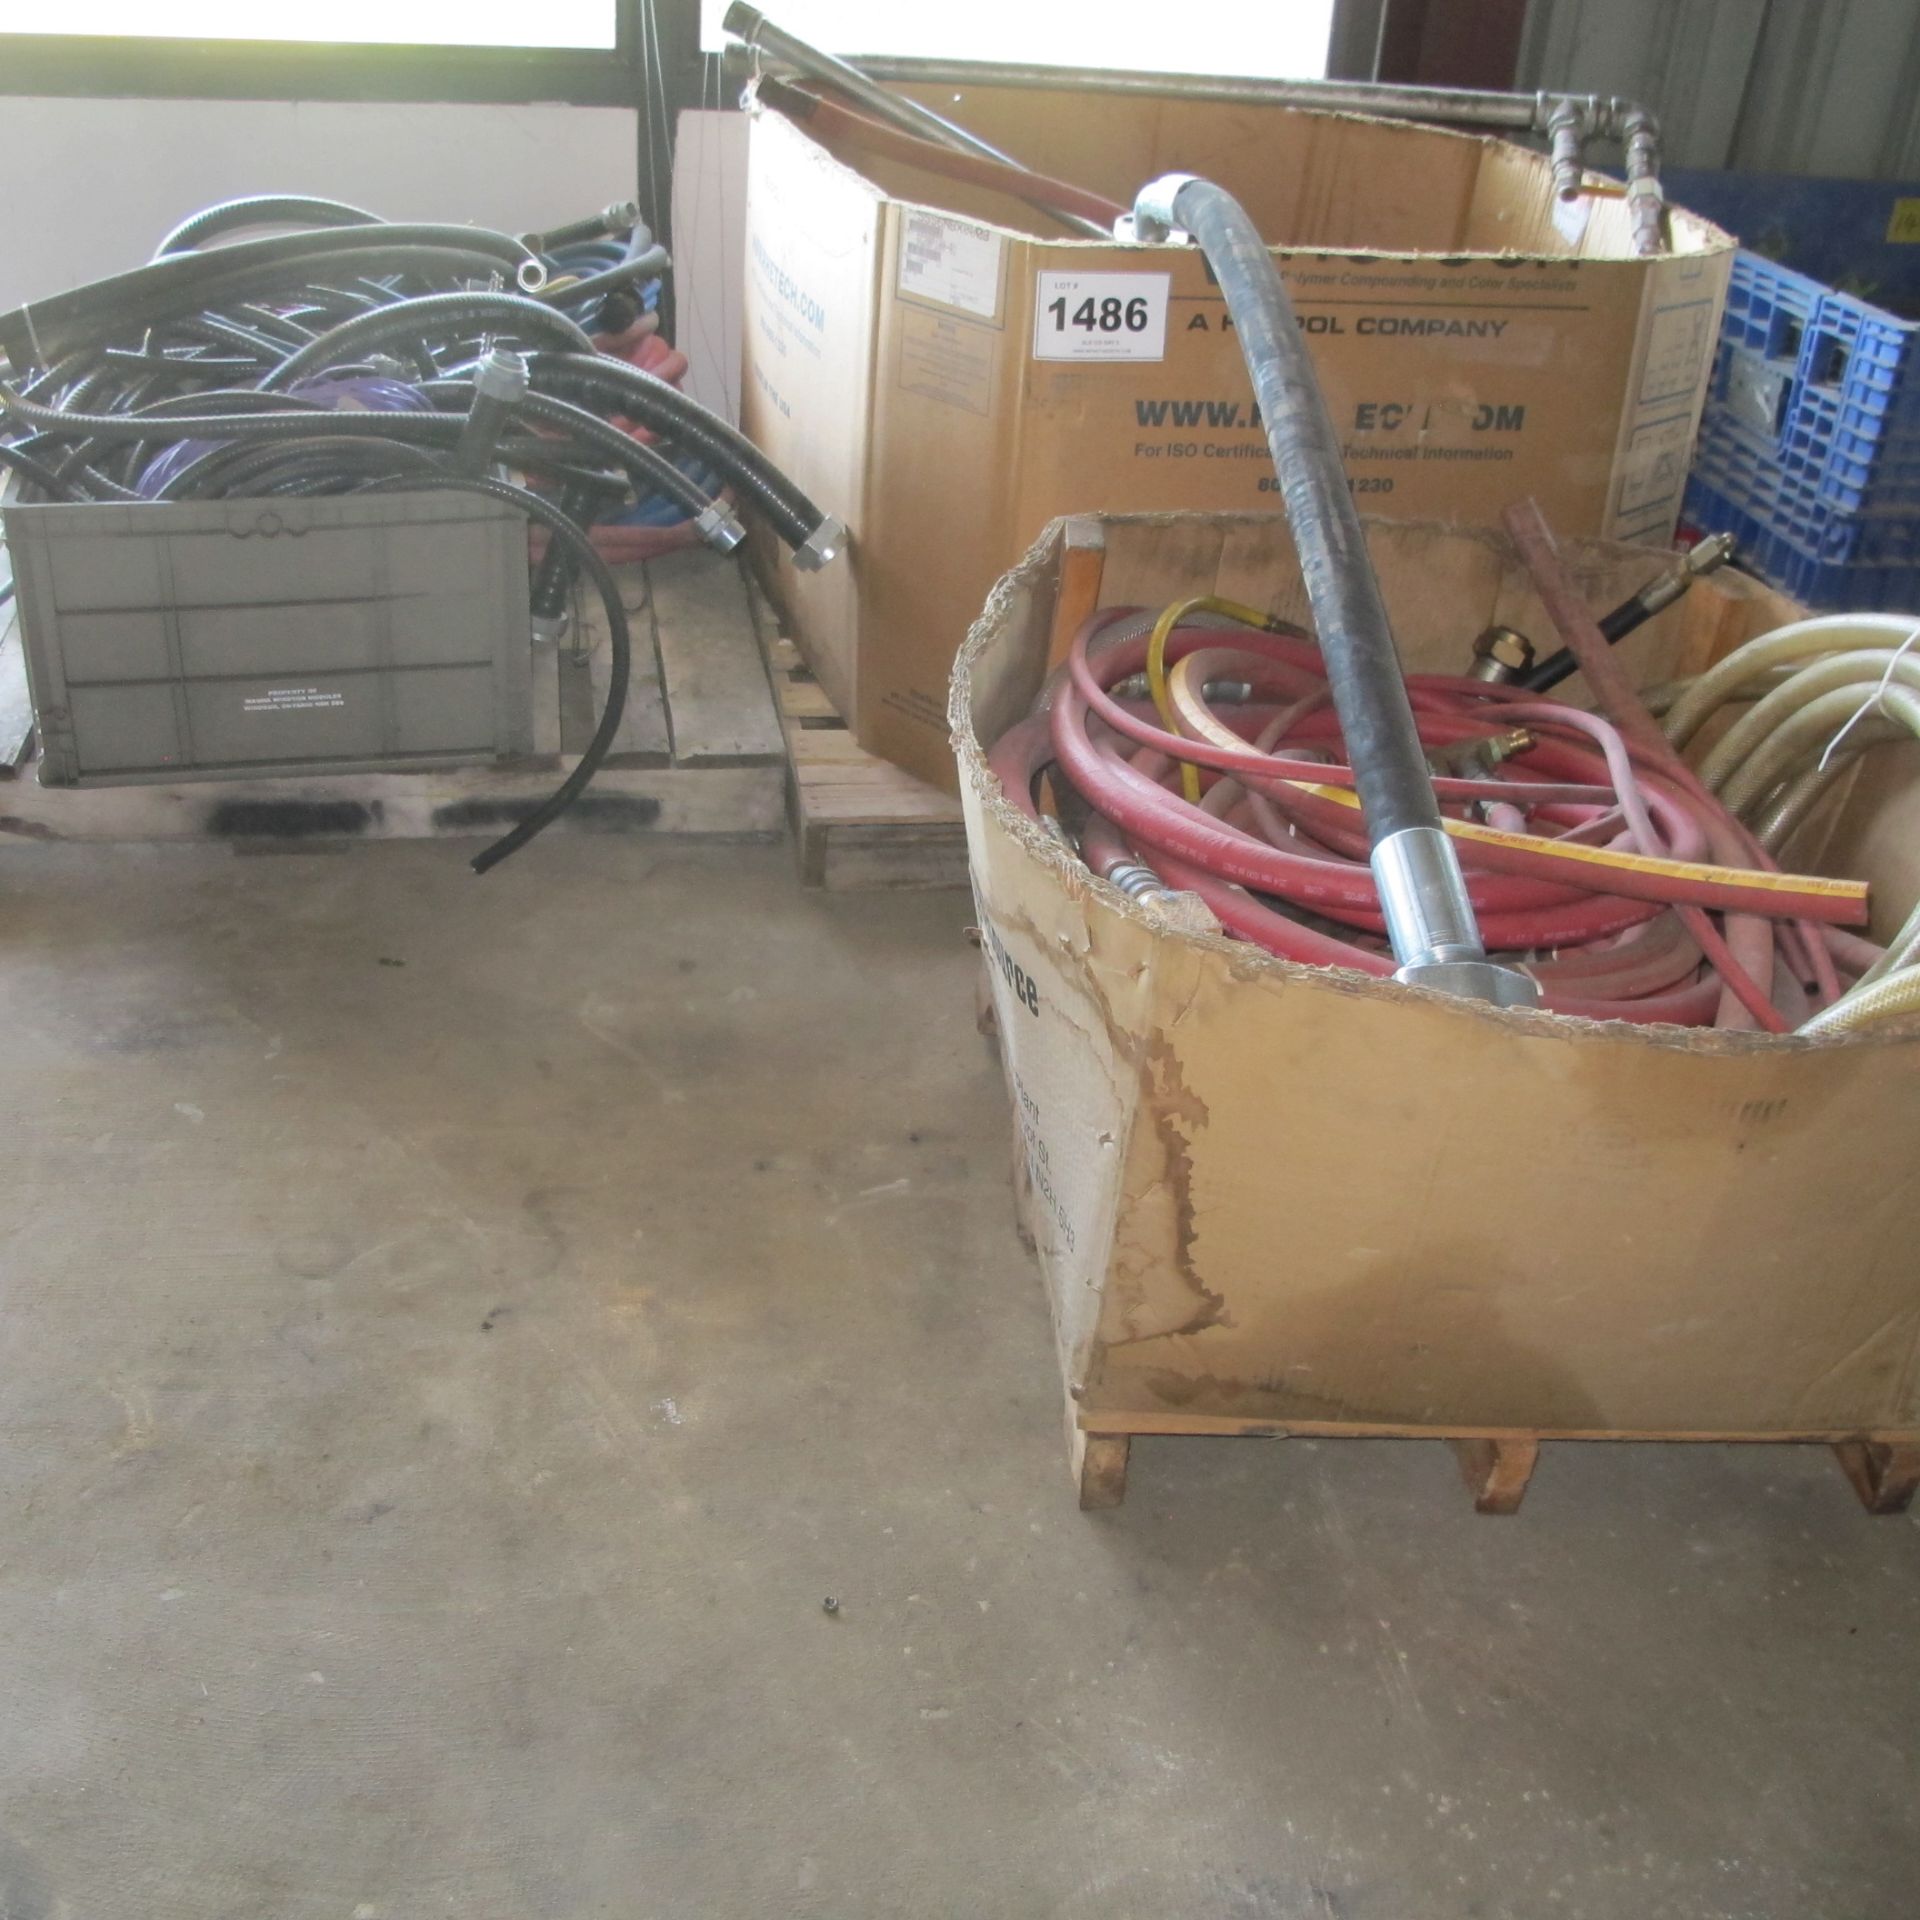 (3) PALLETS OF HOSES